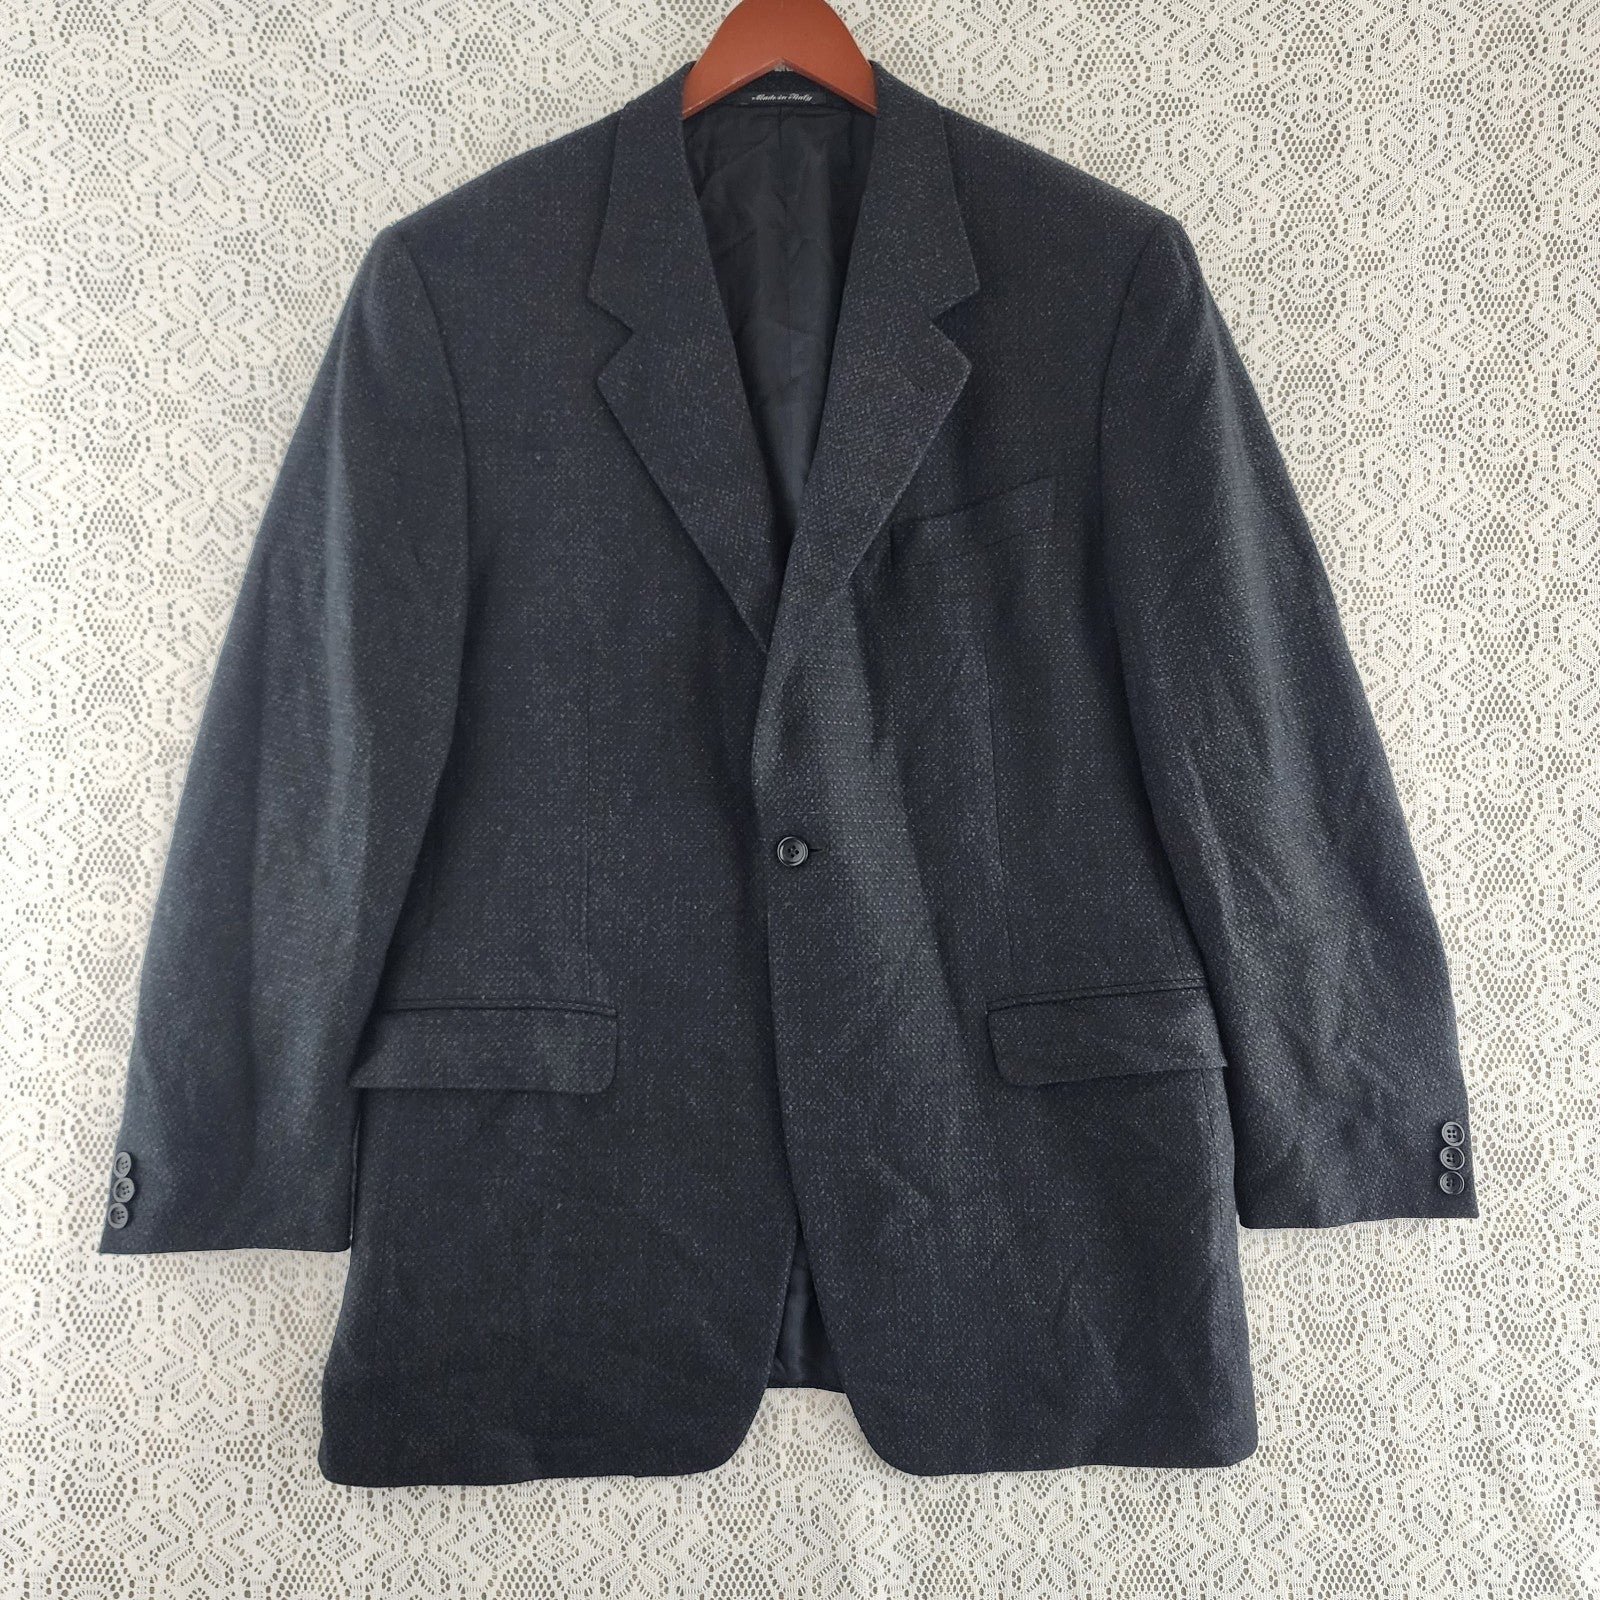 Canali Black Wool Cashmere Blend  Made In Italy Men´s Blazer Size 52L CilMfTOmE